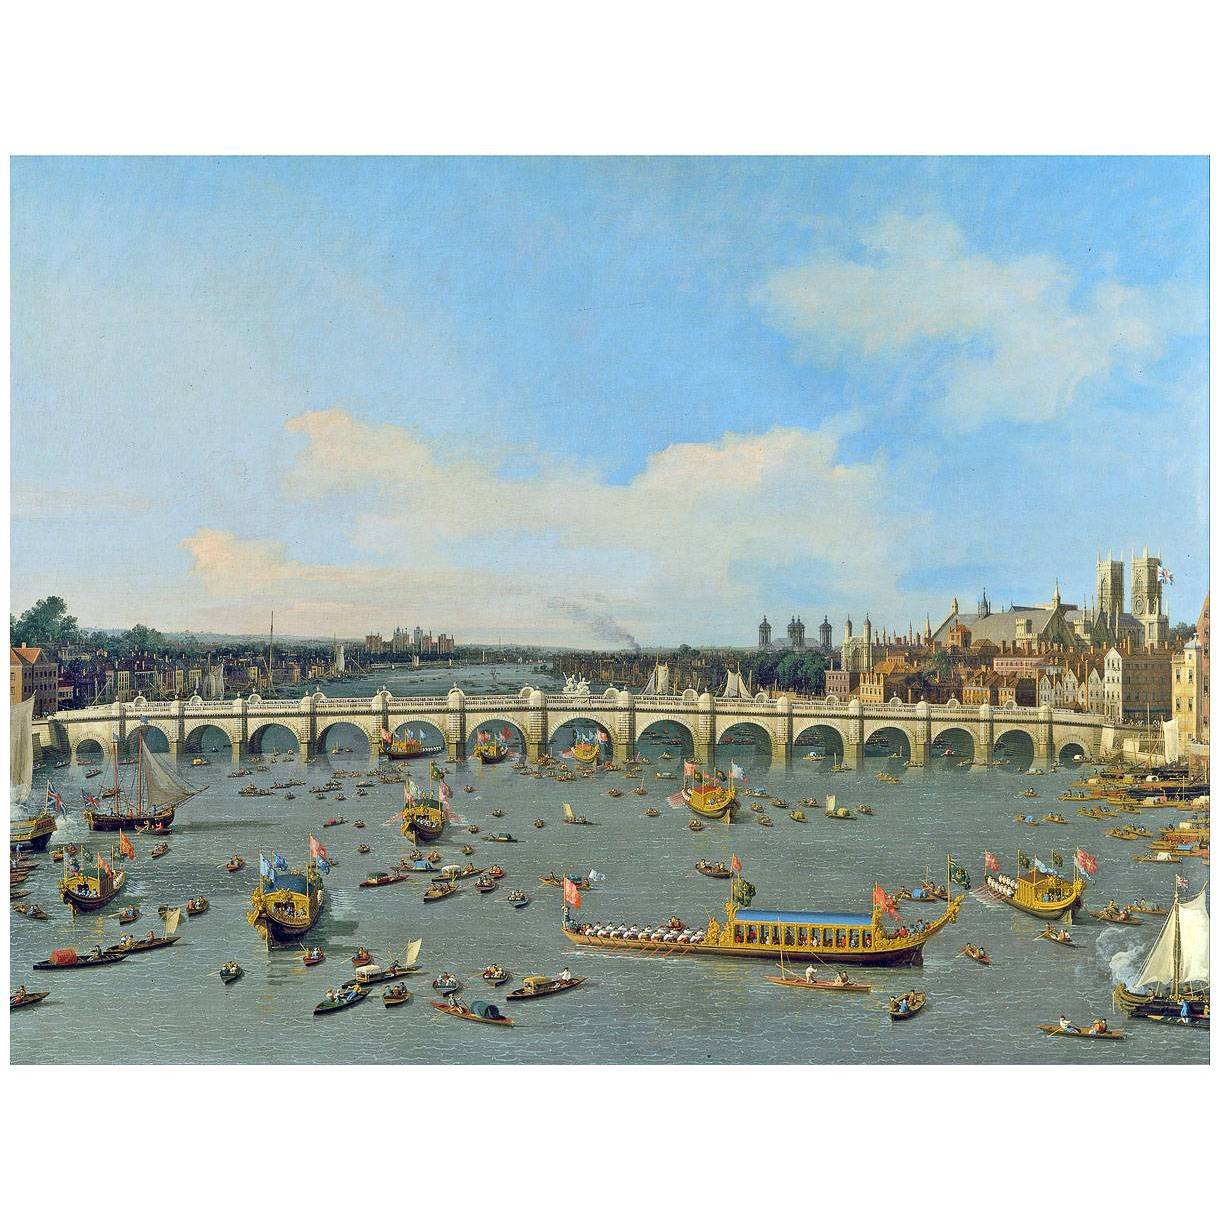 Canaletto. Westminster Bridge. 1747. Yale Center for British Art